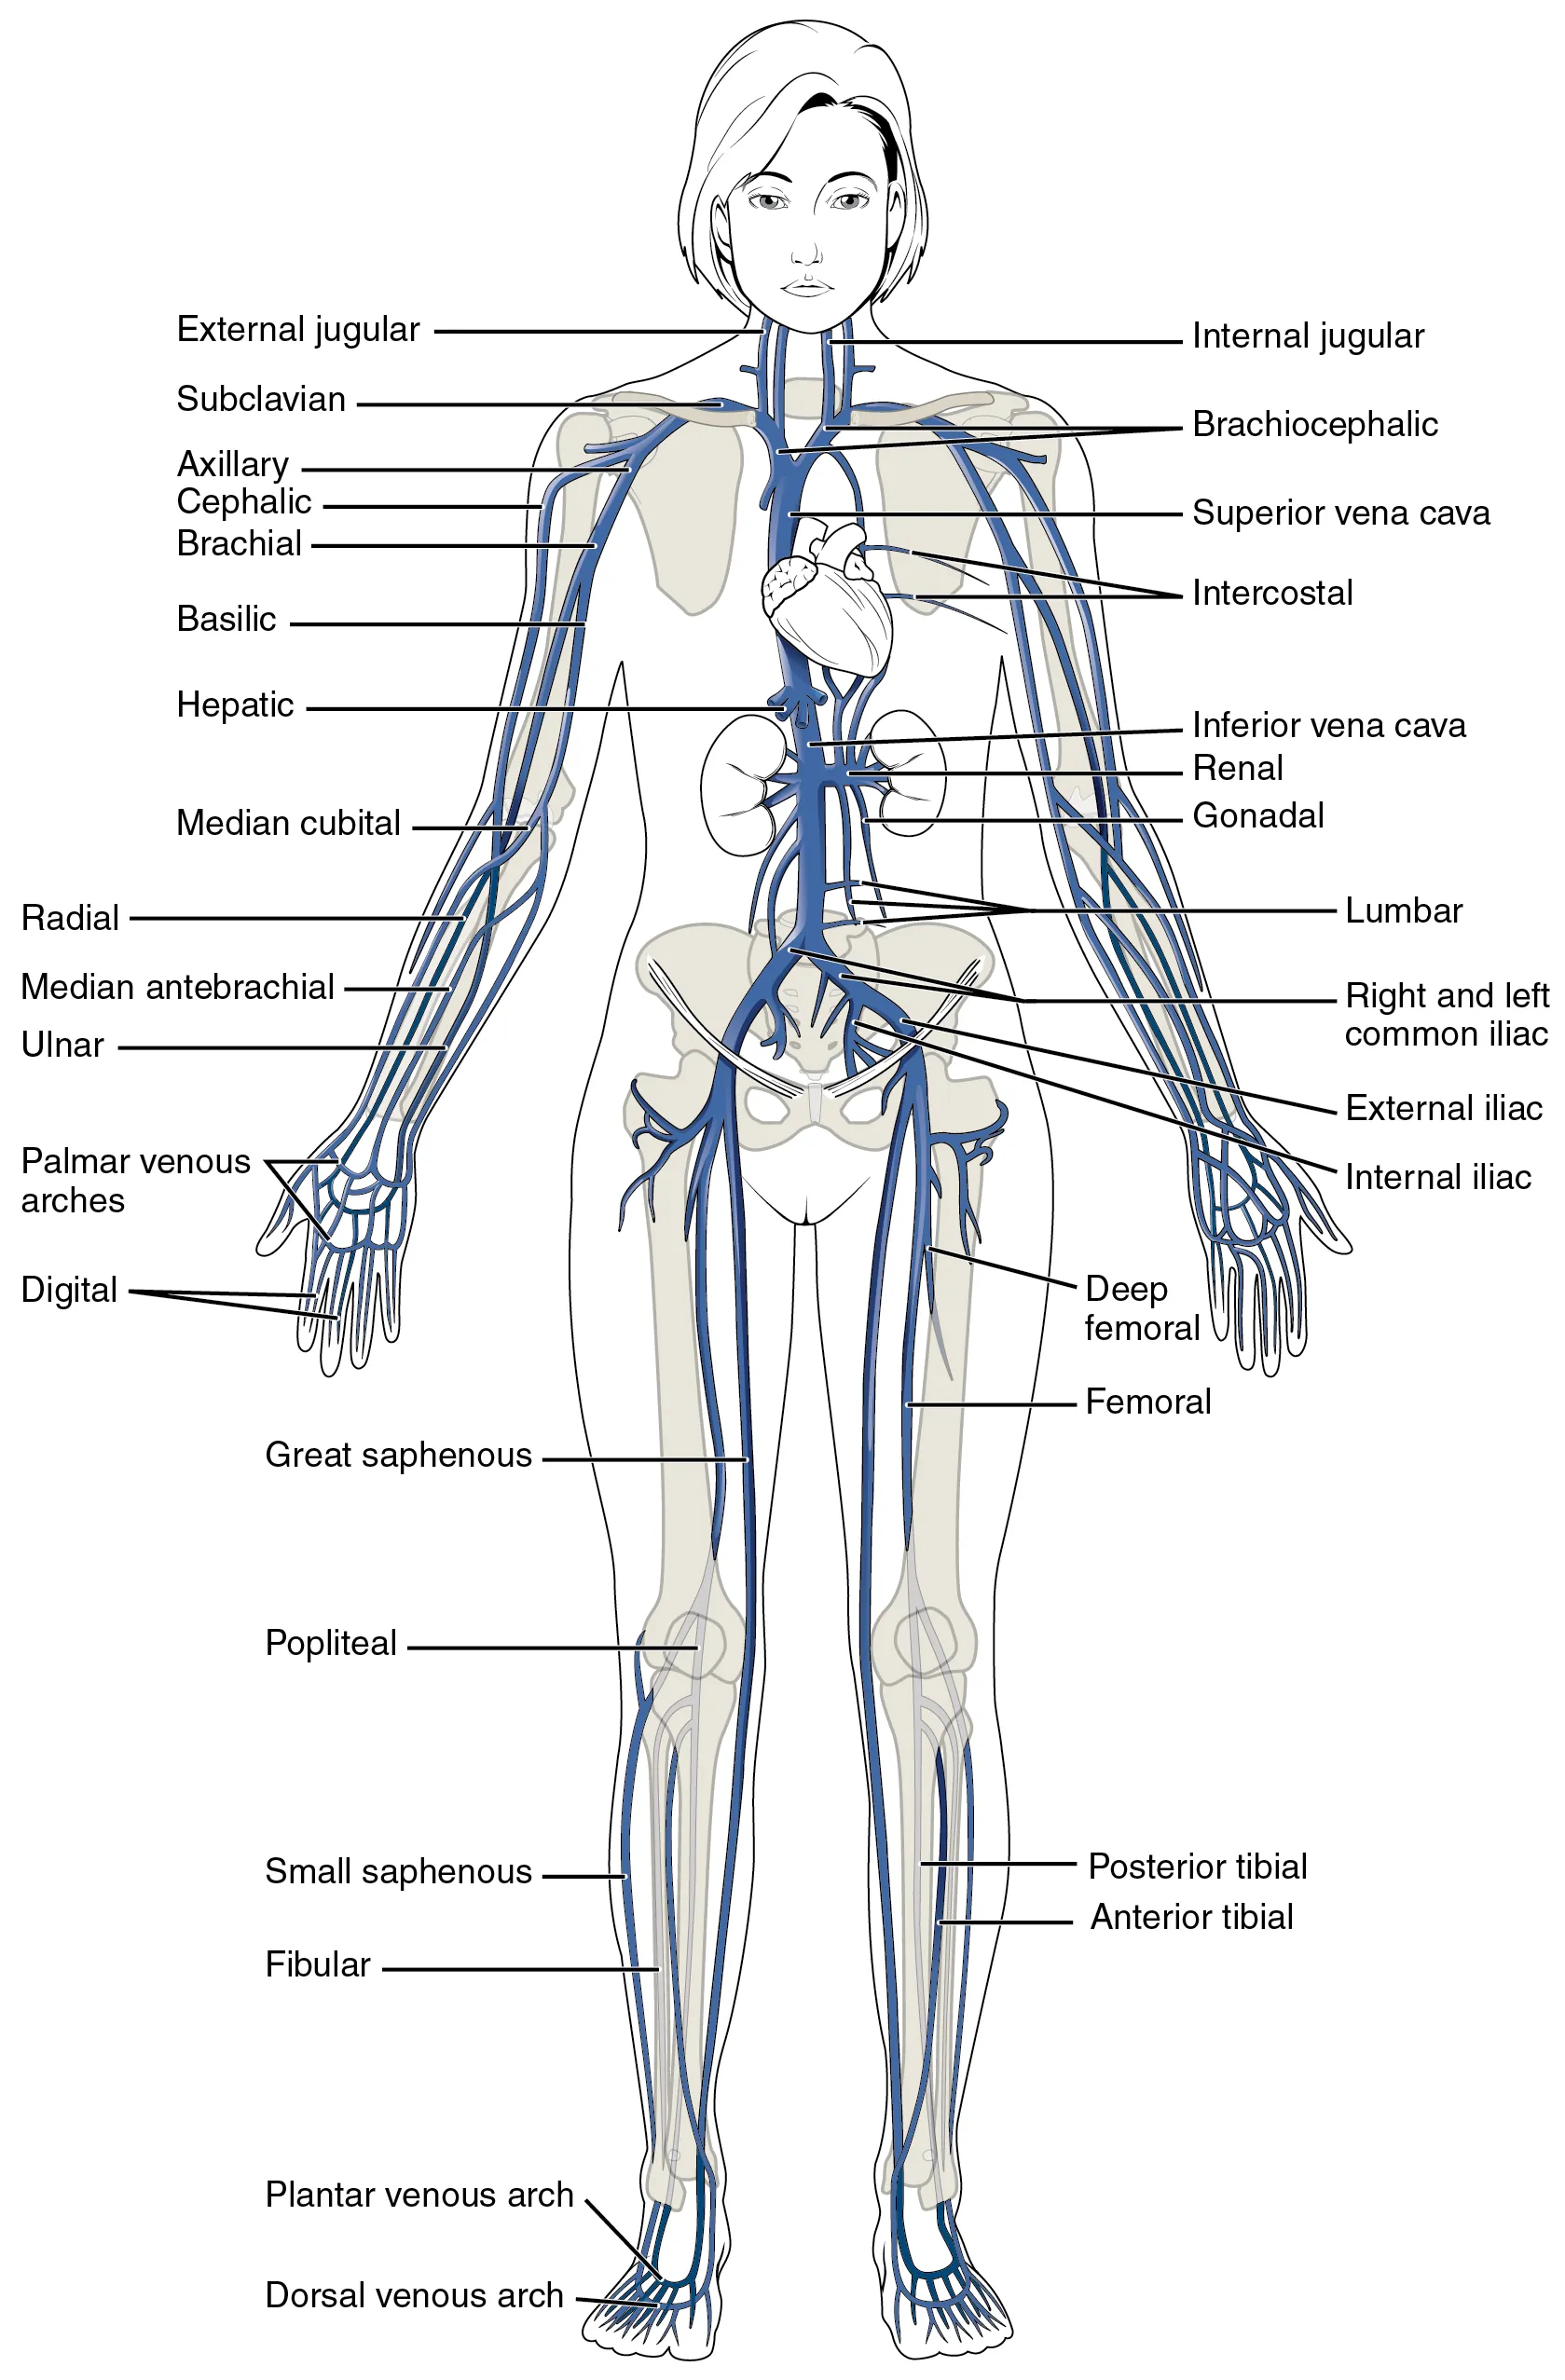 This diagram shows the major veins in the human body.